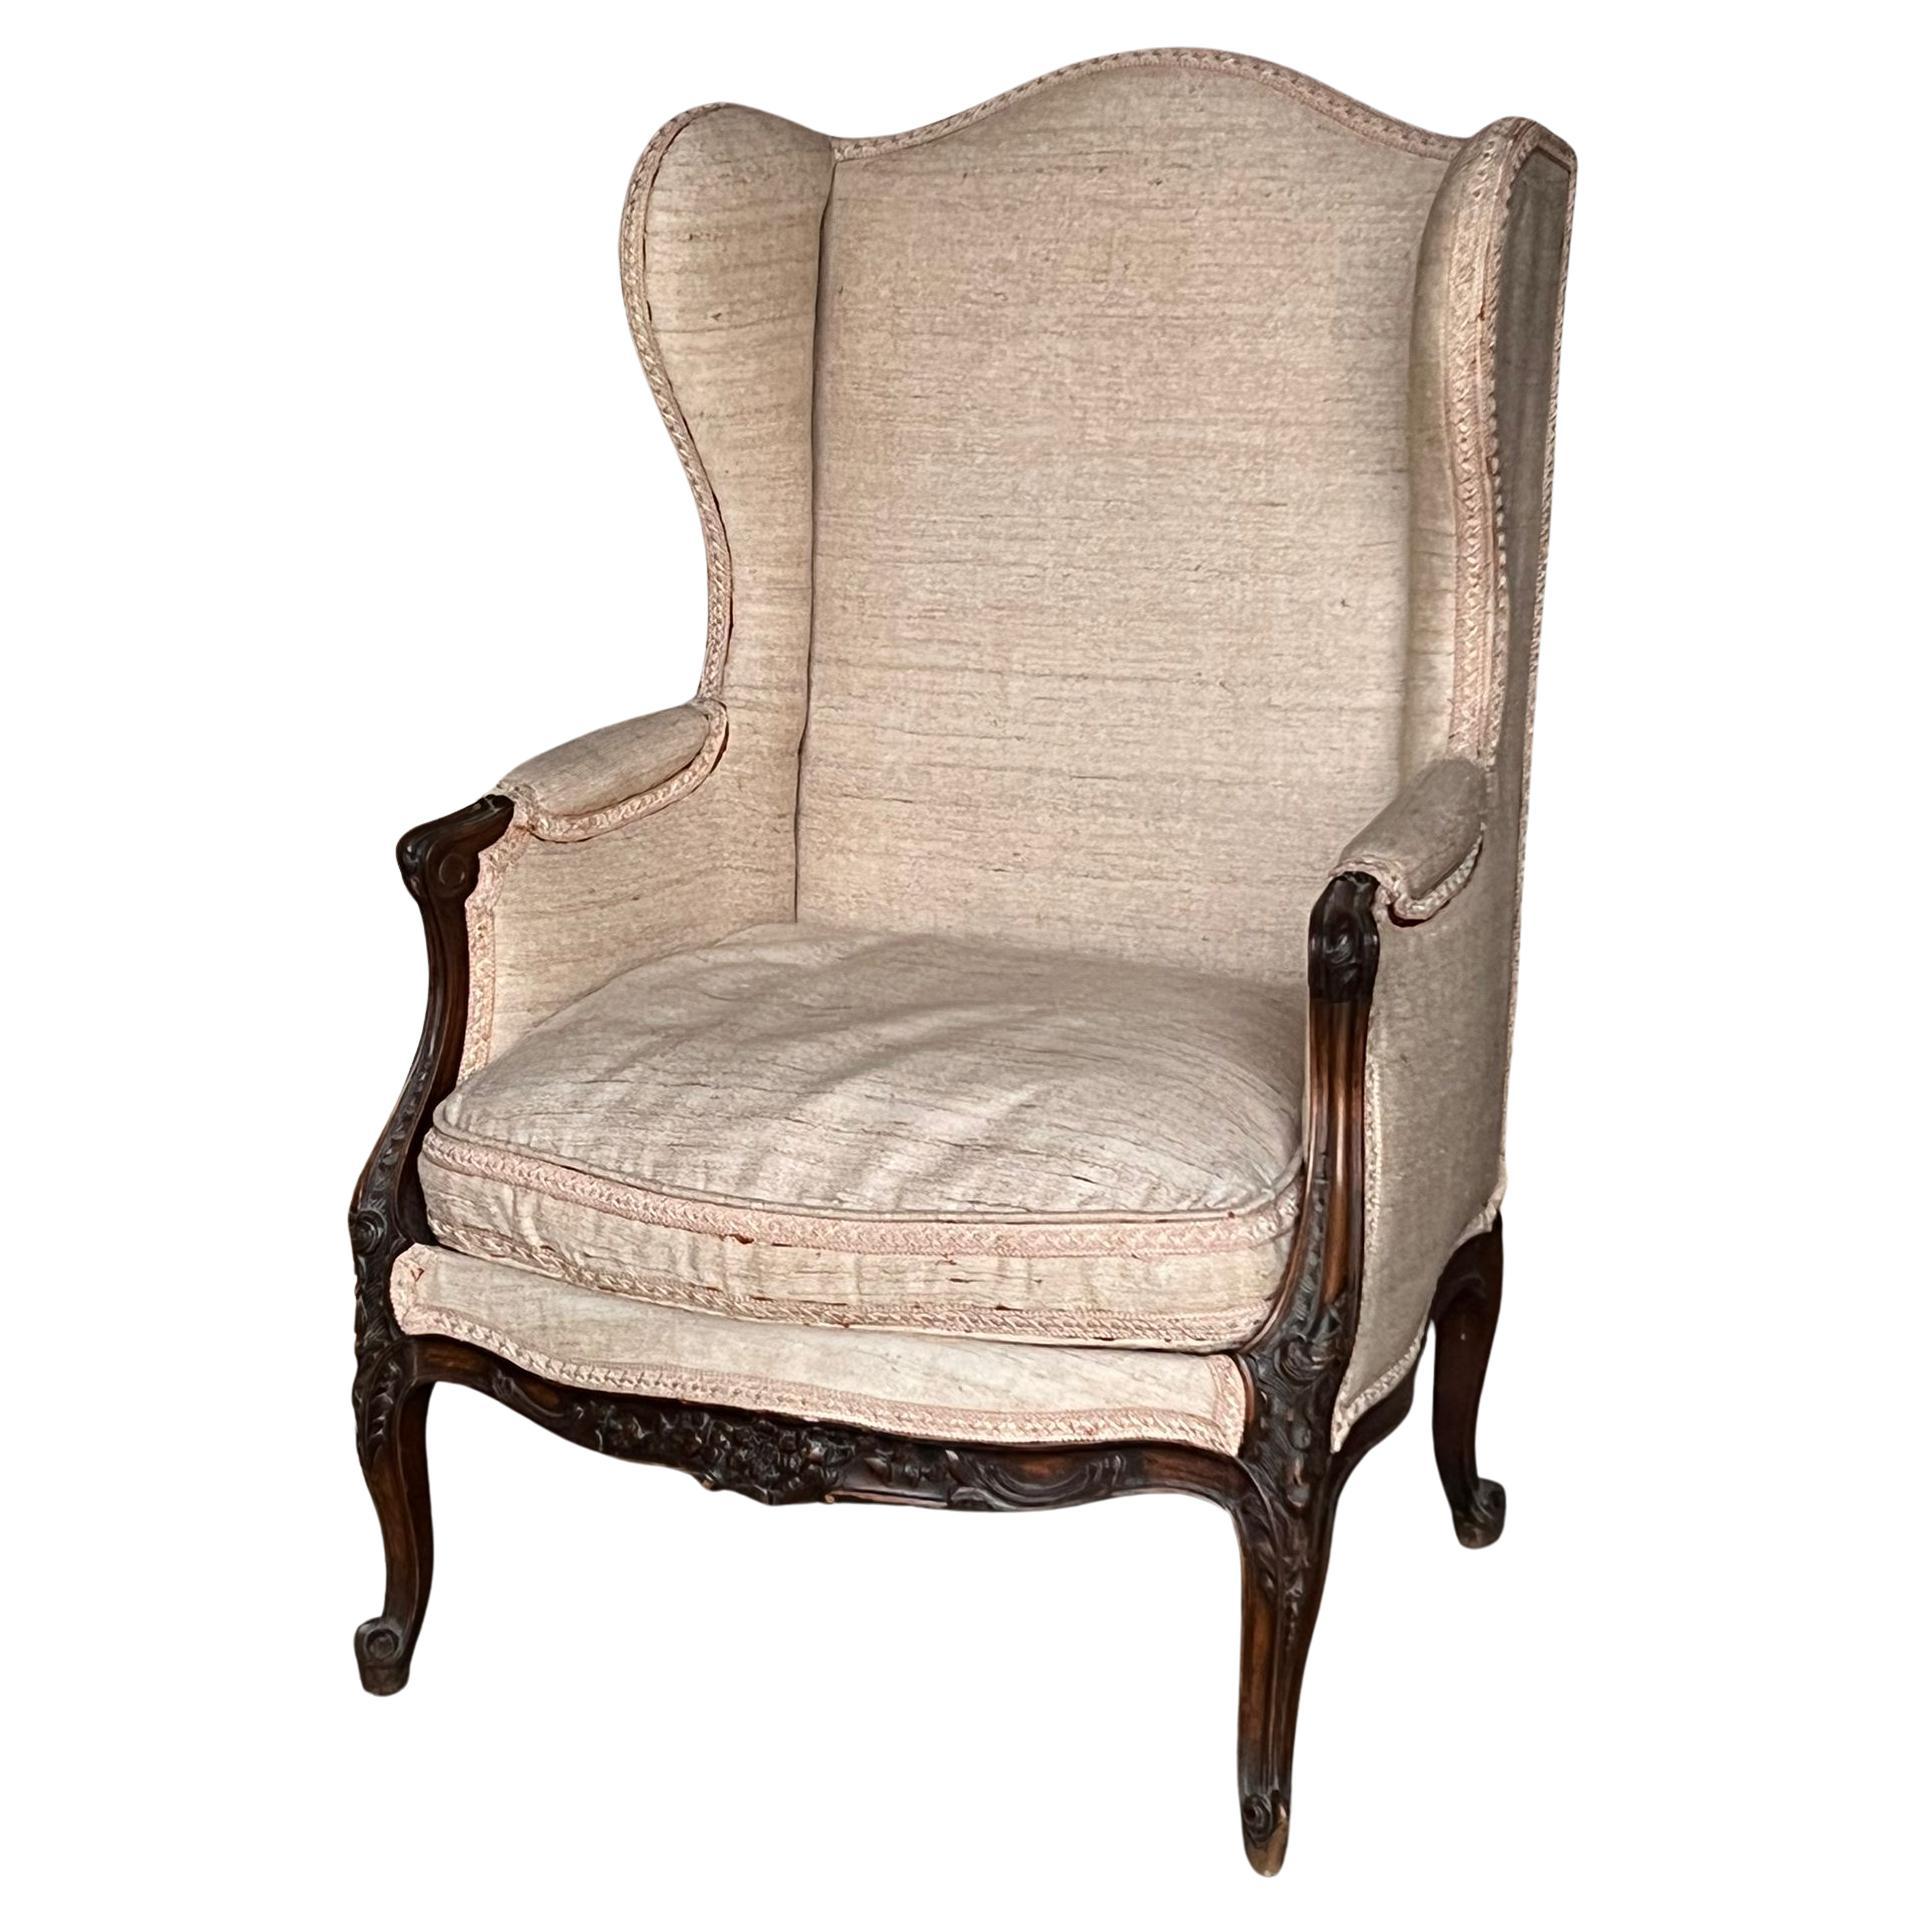 Lovely French Wing Back Arm Chair en vente